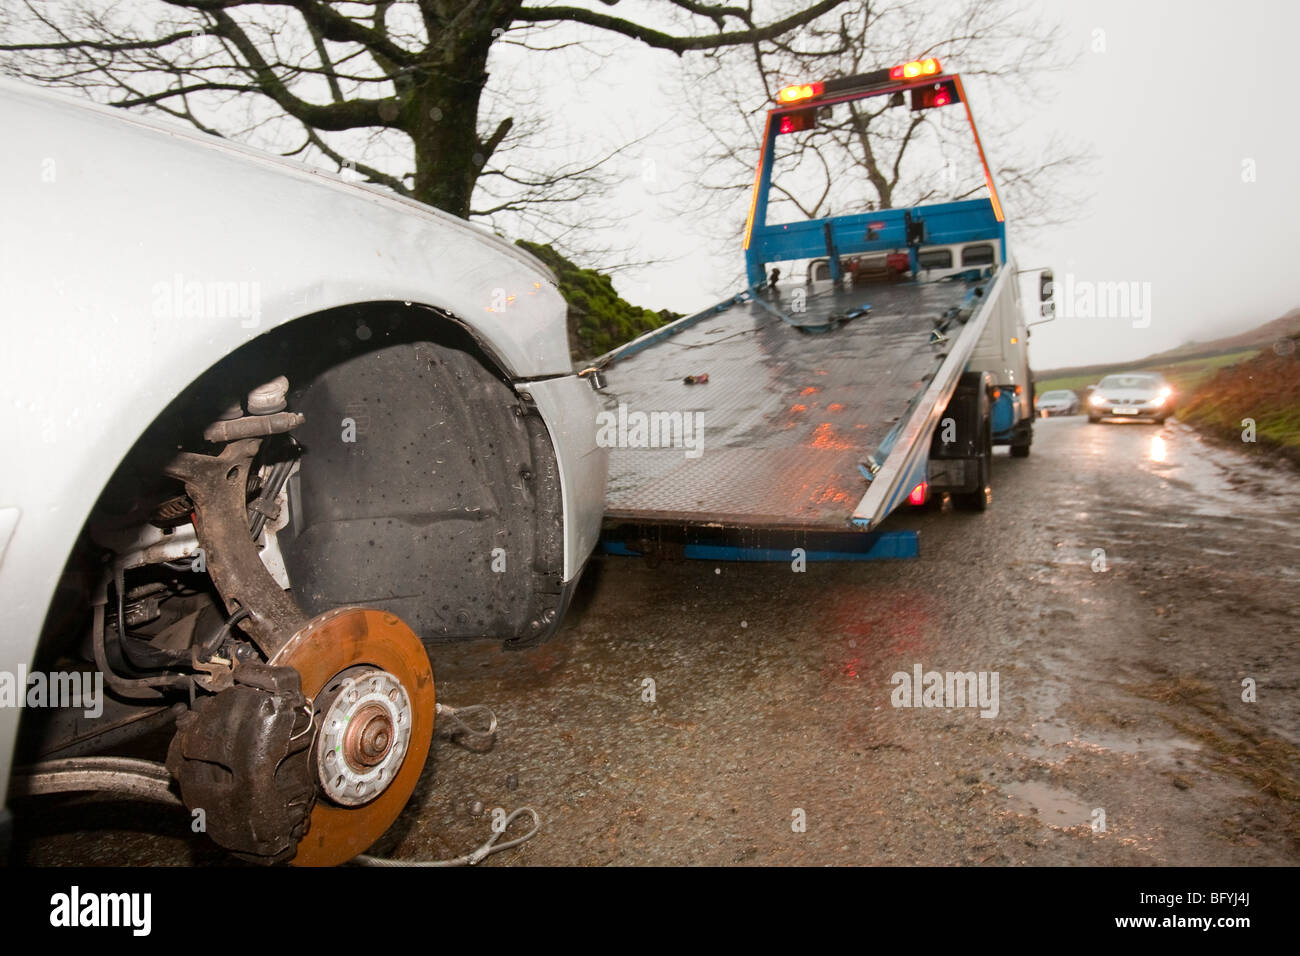 Recovering a car that had its wheels stolen after being abandoned in flood waters near Ambleside, Cumbria, UK. Stock Photo